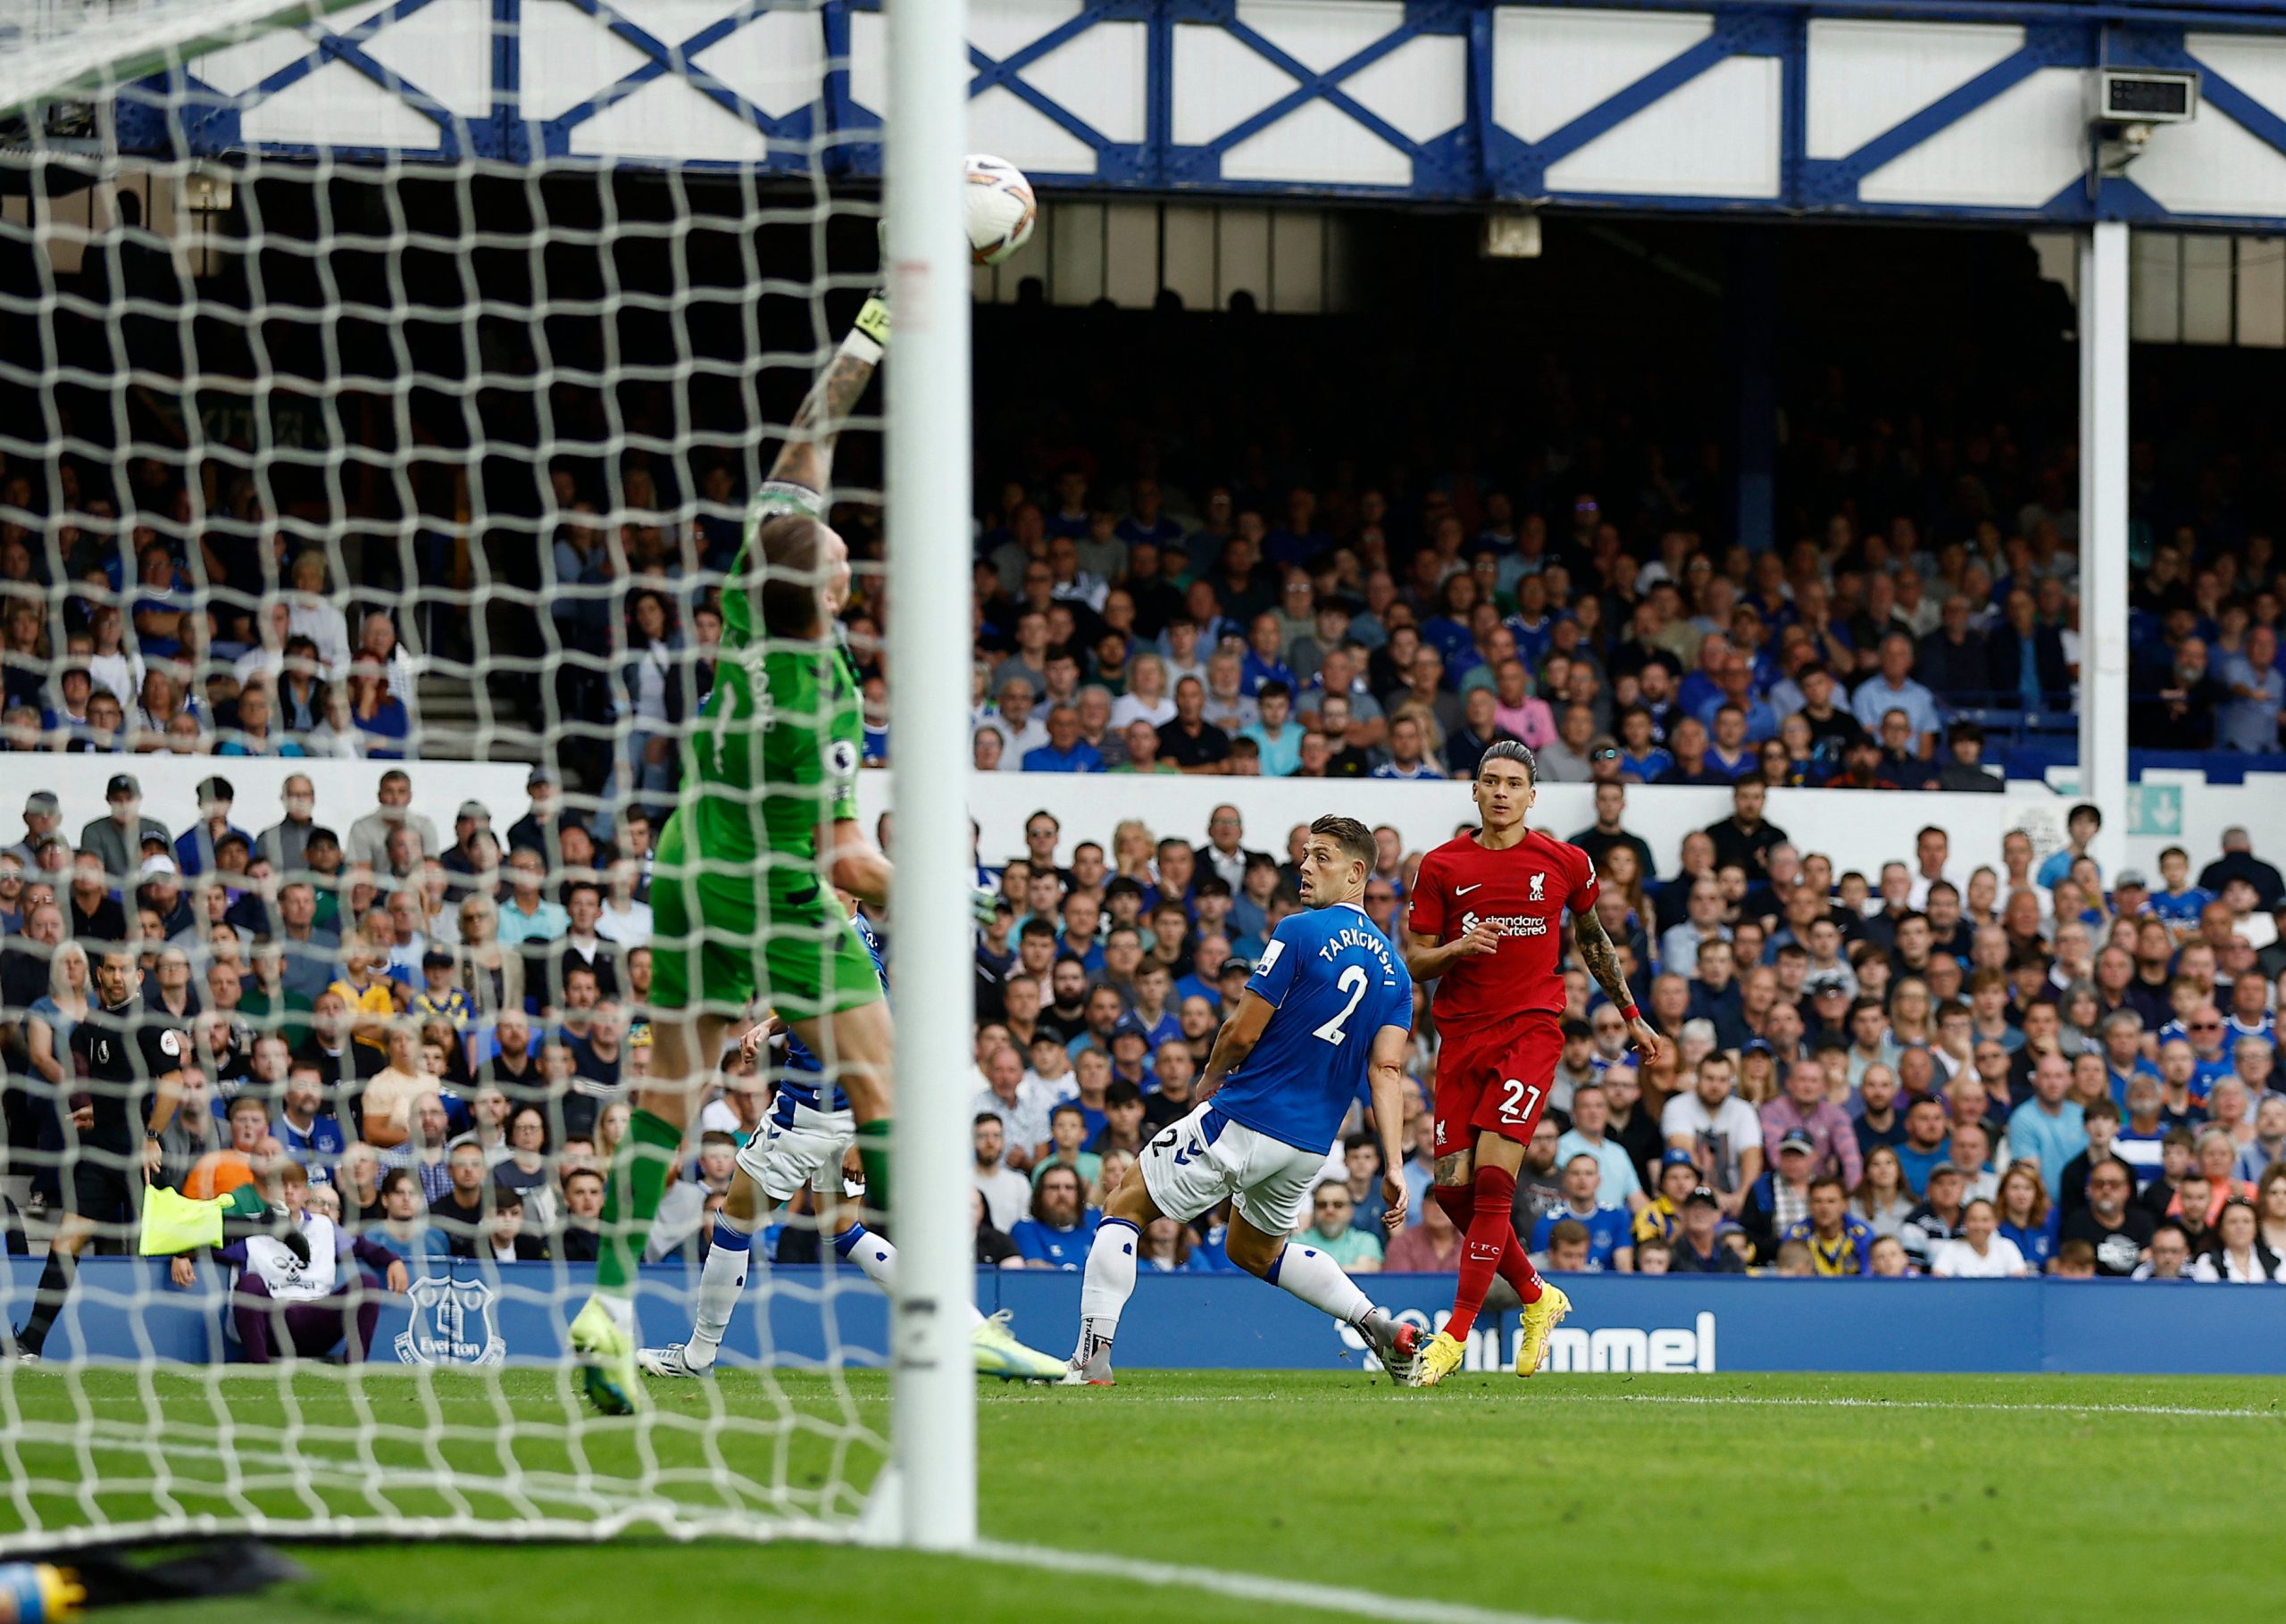 Helter skelter in Merseyside: Everton and Liverpool play out frenetic 0-0 draw